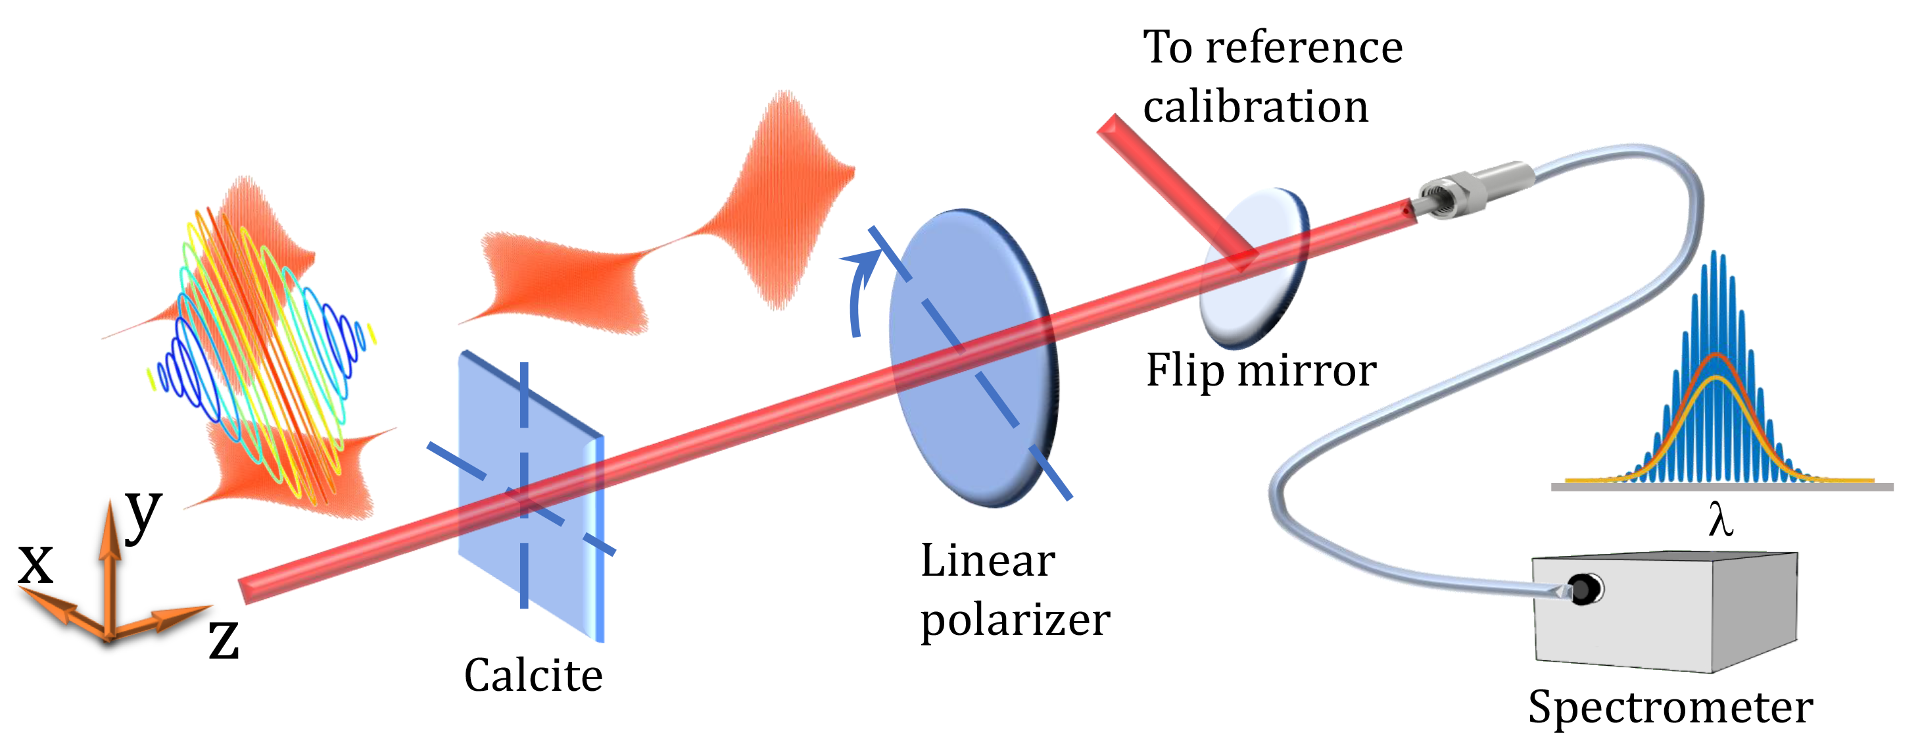 Schematic of the experimental setup used for the measurement of time-evolving ultrashort laser pulses